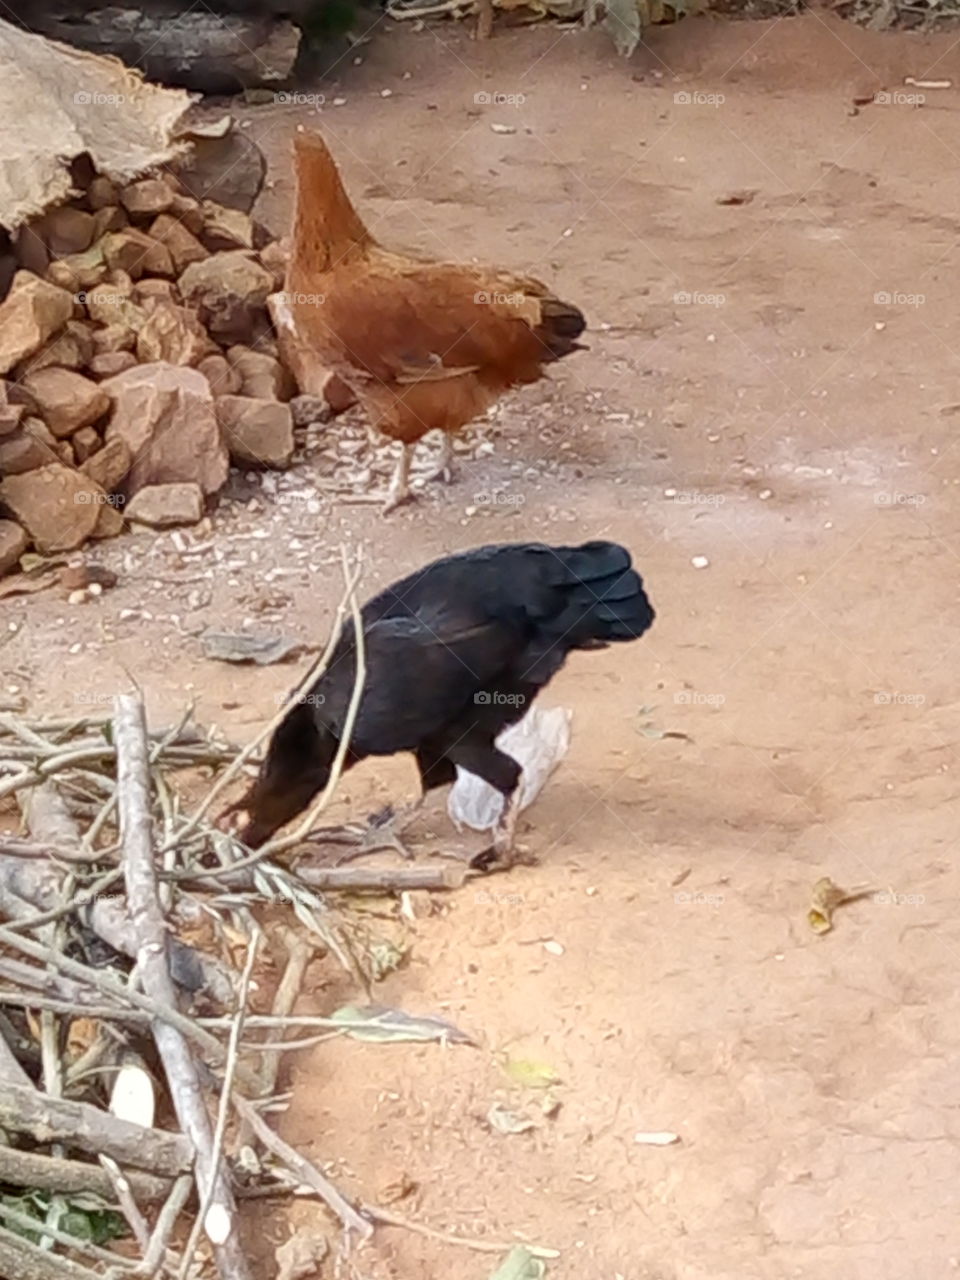 Our indegeneous chicken in rural areas.
They are left to roam around the bush eat from the ground,termites and insects.
This type is natural and nice yummy when prepared.
The eggs are nice with its yellow real Indeed.
They are resistant to deseases.